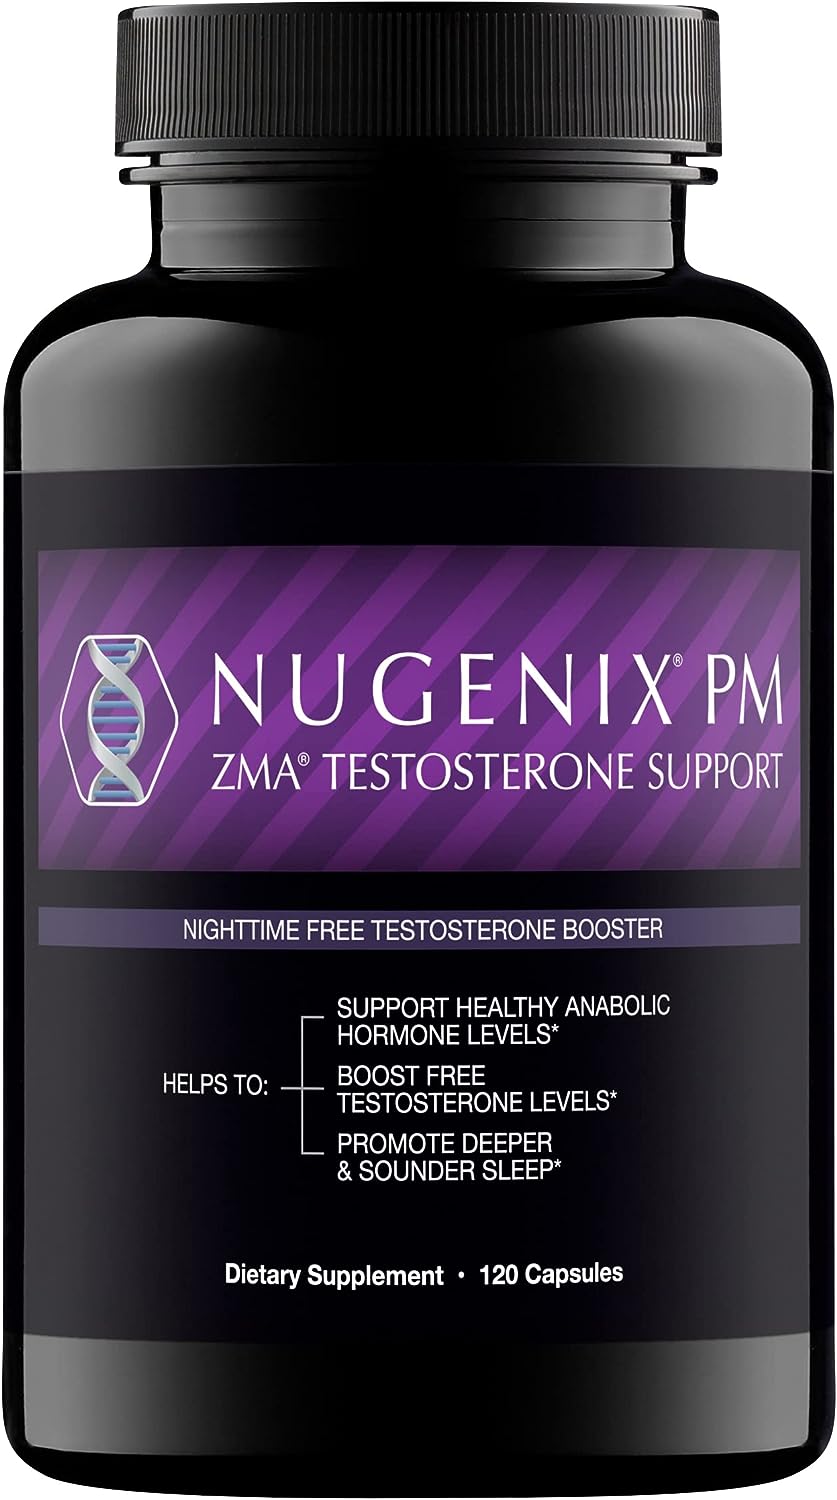 Nugenix PM ZMA - Nighttime Free Testosterone Booster and Sleep Support, 120 Count